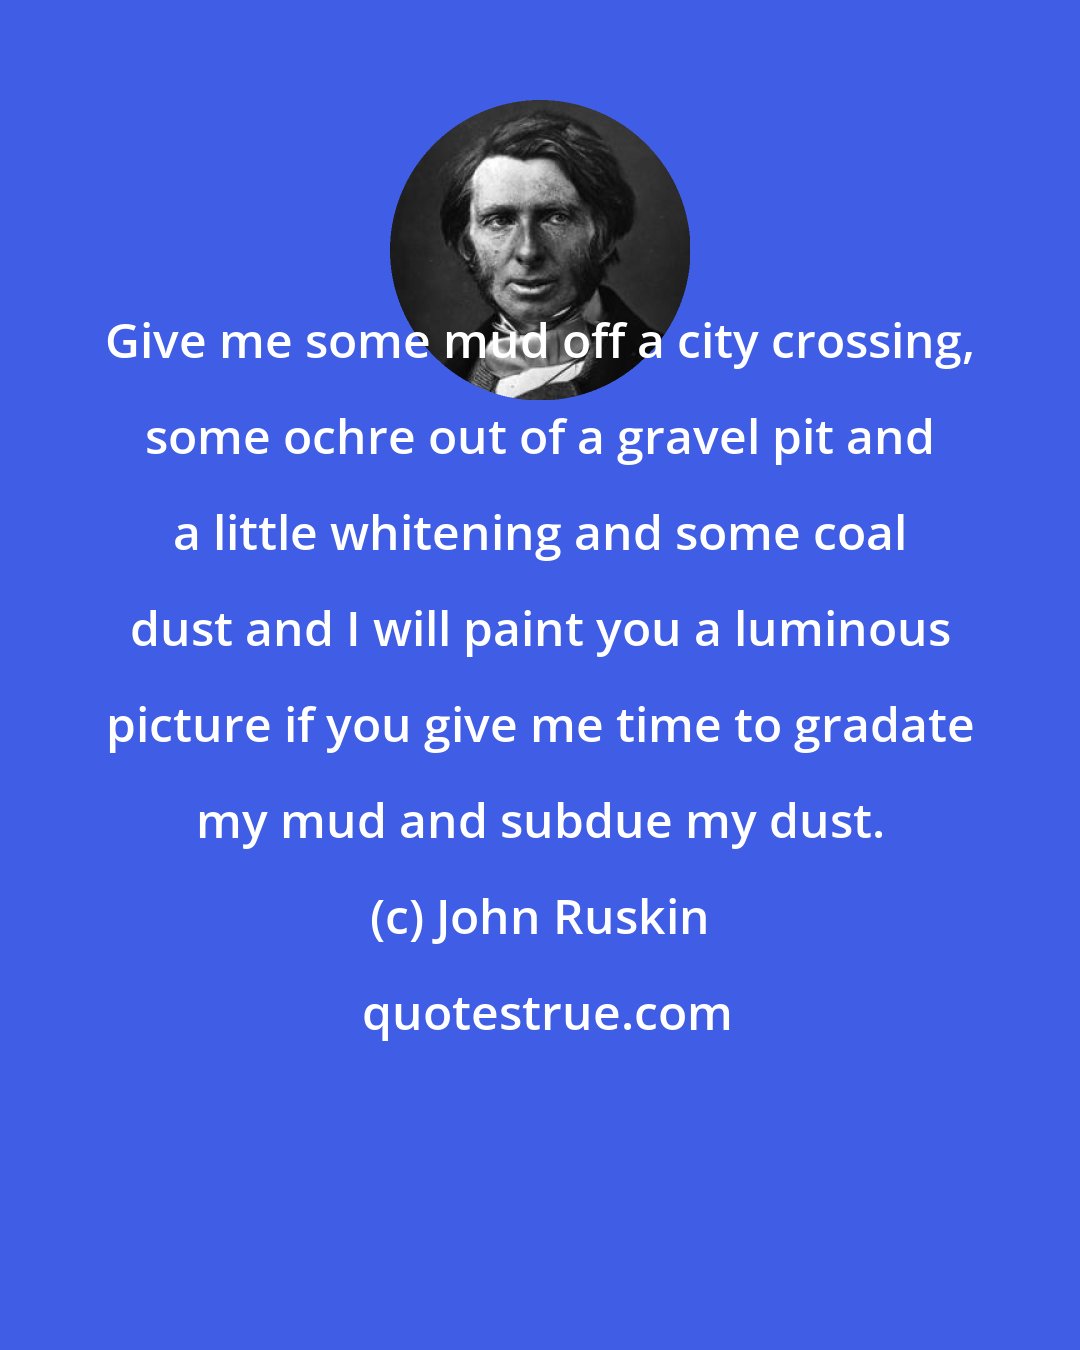 John Ruskin: Give me some mud off a city crossing, some ochre out of a gravel pit and a little whitening and some coal dust and I will paint you a luminous picture if you give me time to gradate my mud and subdue my dust.